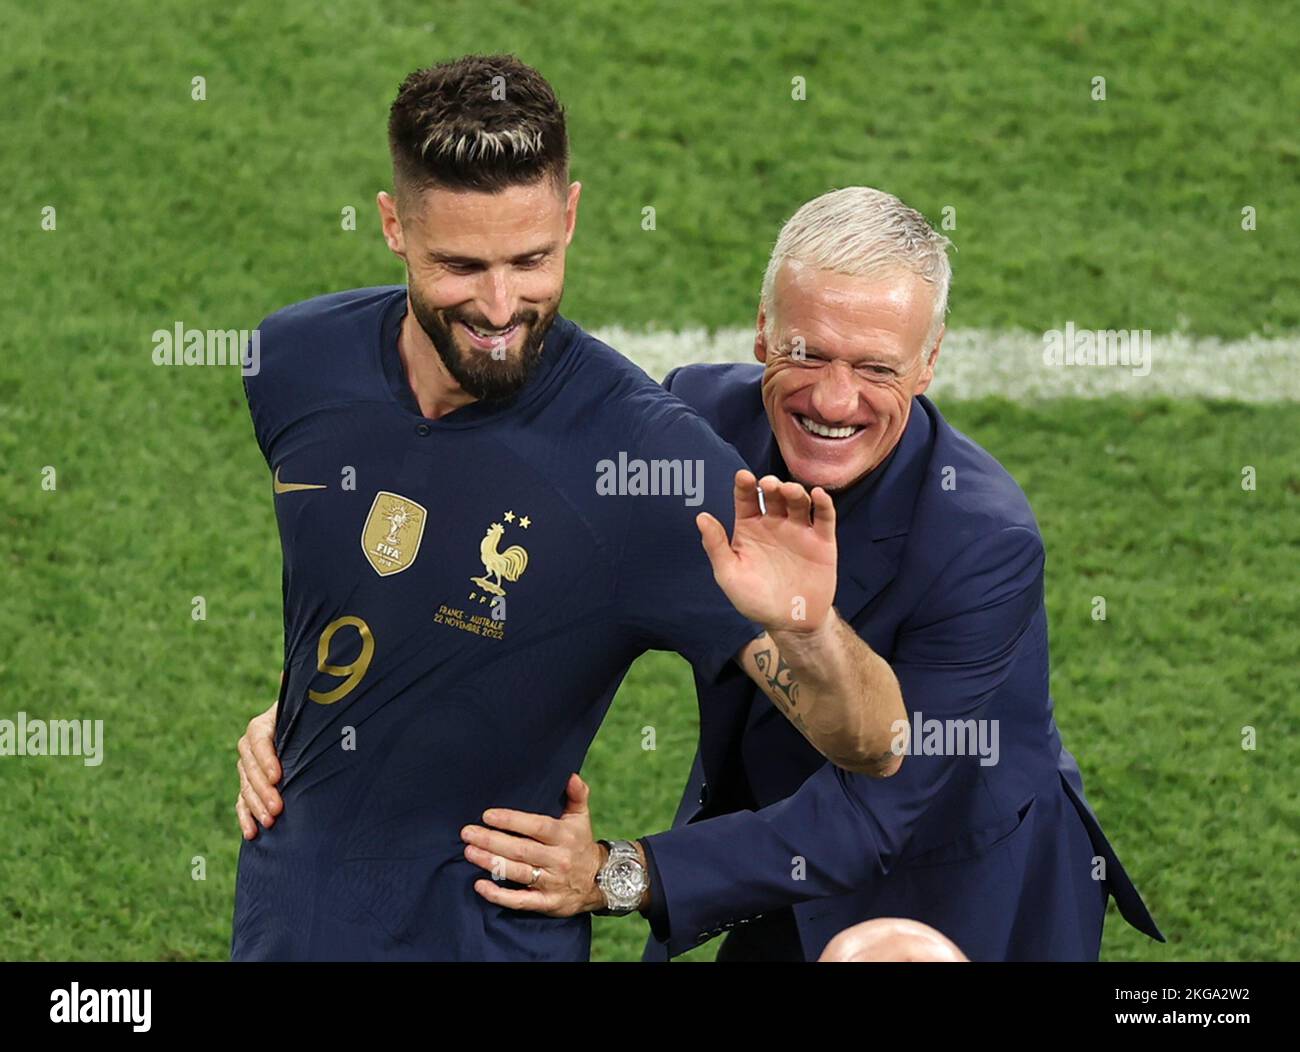 Al Wakrah, Qatar. 22nd Nov, 2022. Olivier Giroud (L) of France celebrates with Didier Deschamps, head coach of France, during the Group D match between France and Australia of the 2022 FIFA World Cup at Al Janoub Stadium in Al Wakrah, Qatar, Nov. 22, 2022. Credit: Pan Yulong/Xinhua/Alamy Live News Stock Photo